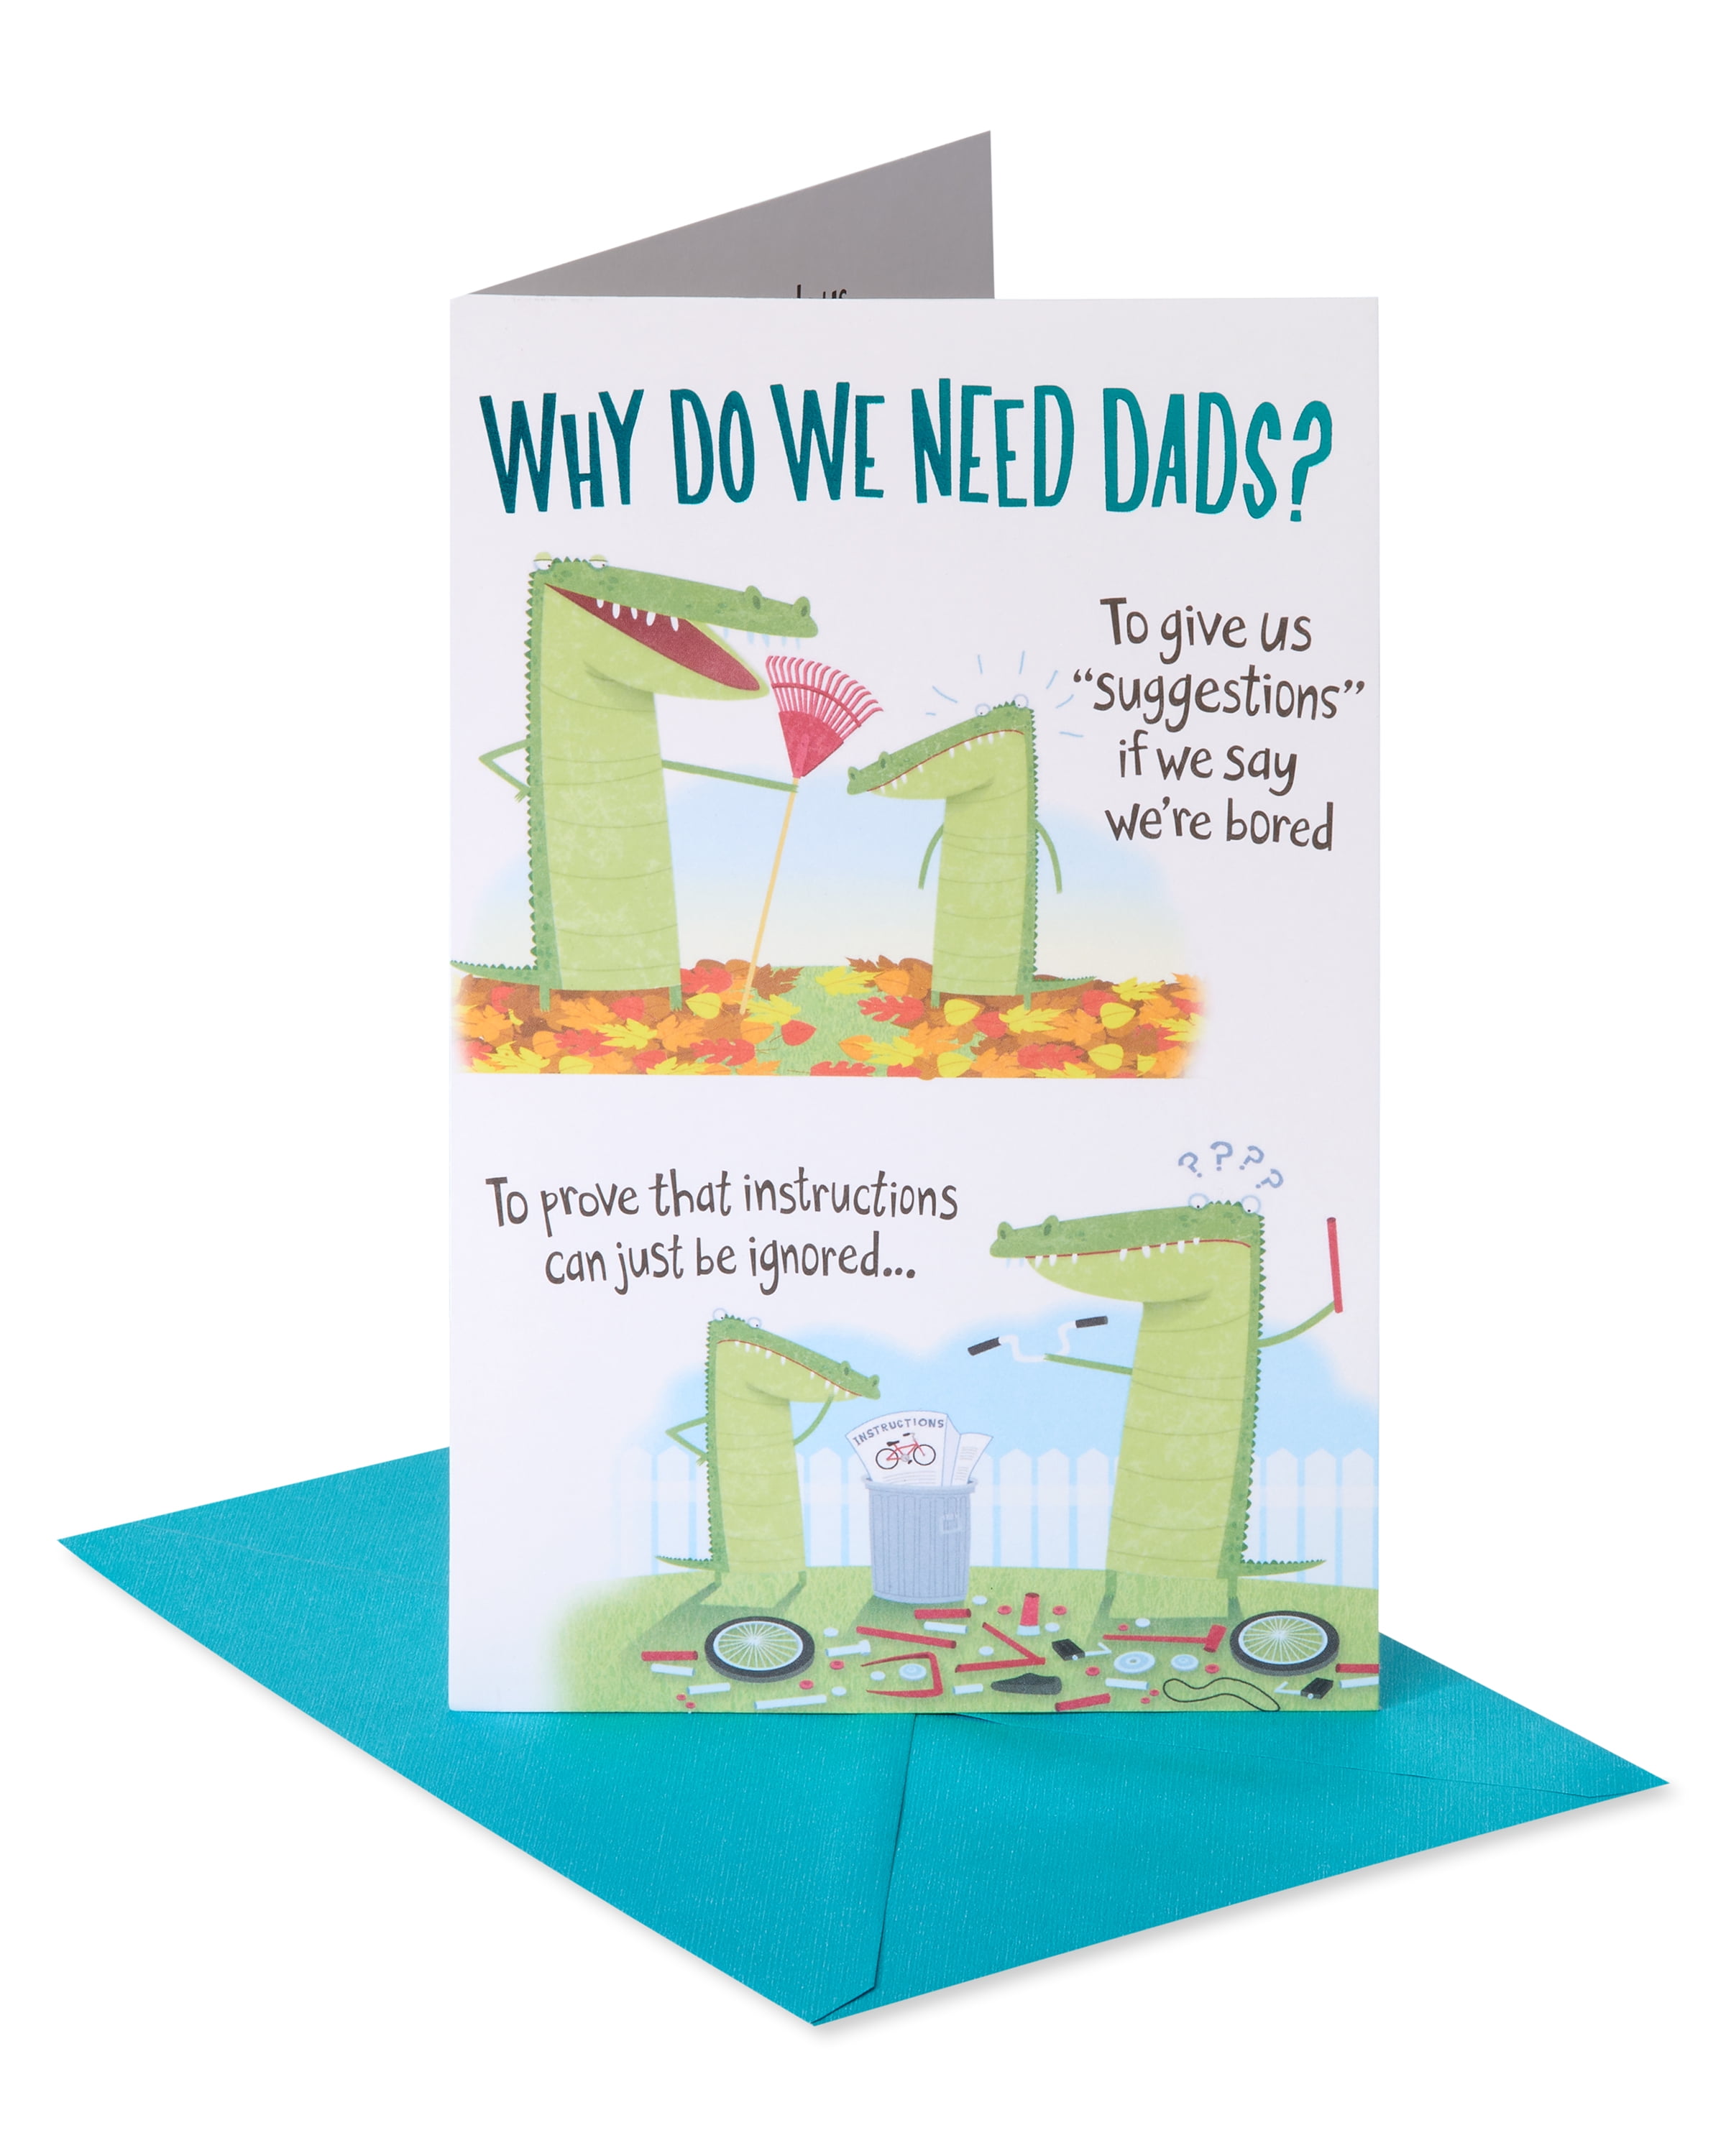 Details about   American Greetings Dad Father's Day Card *NEW*